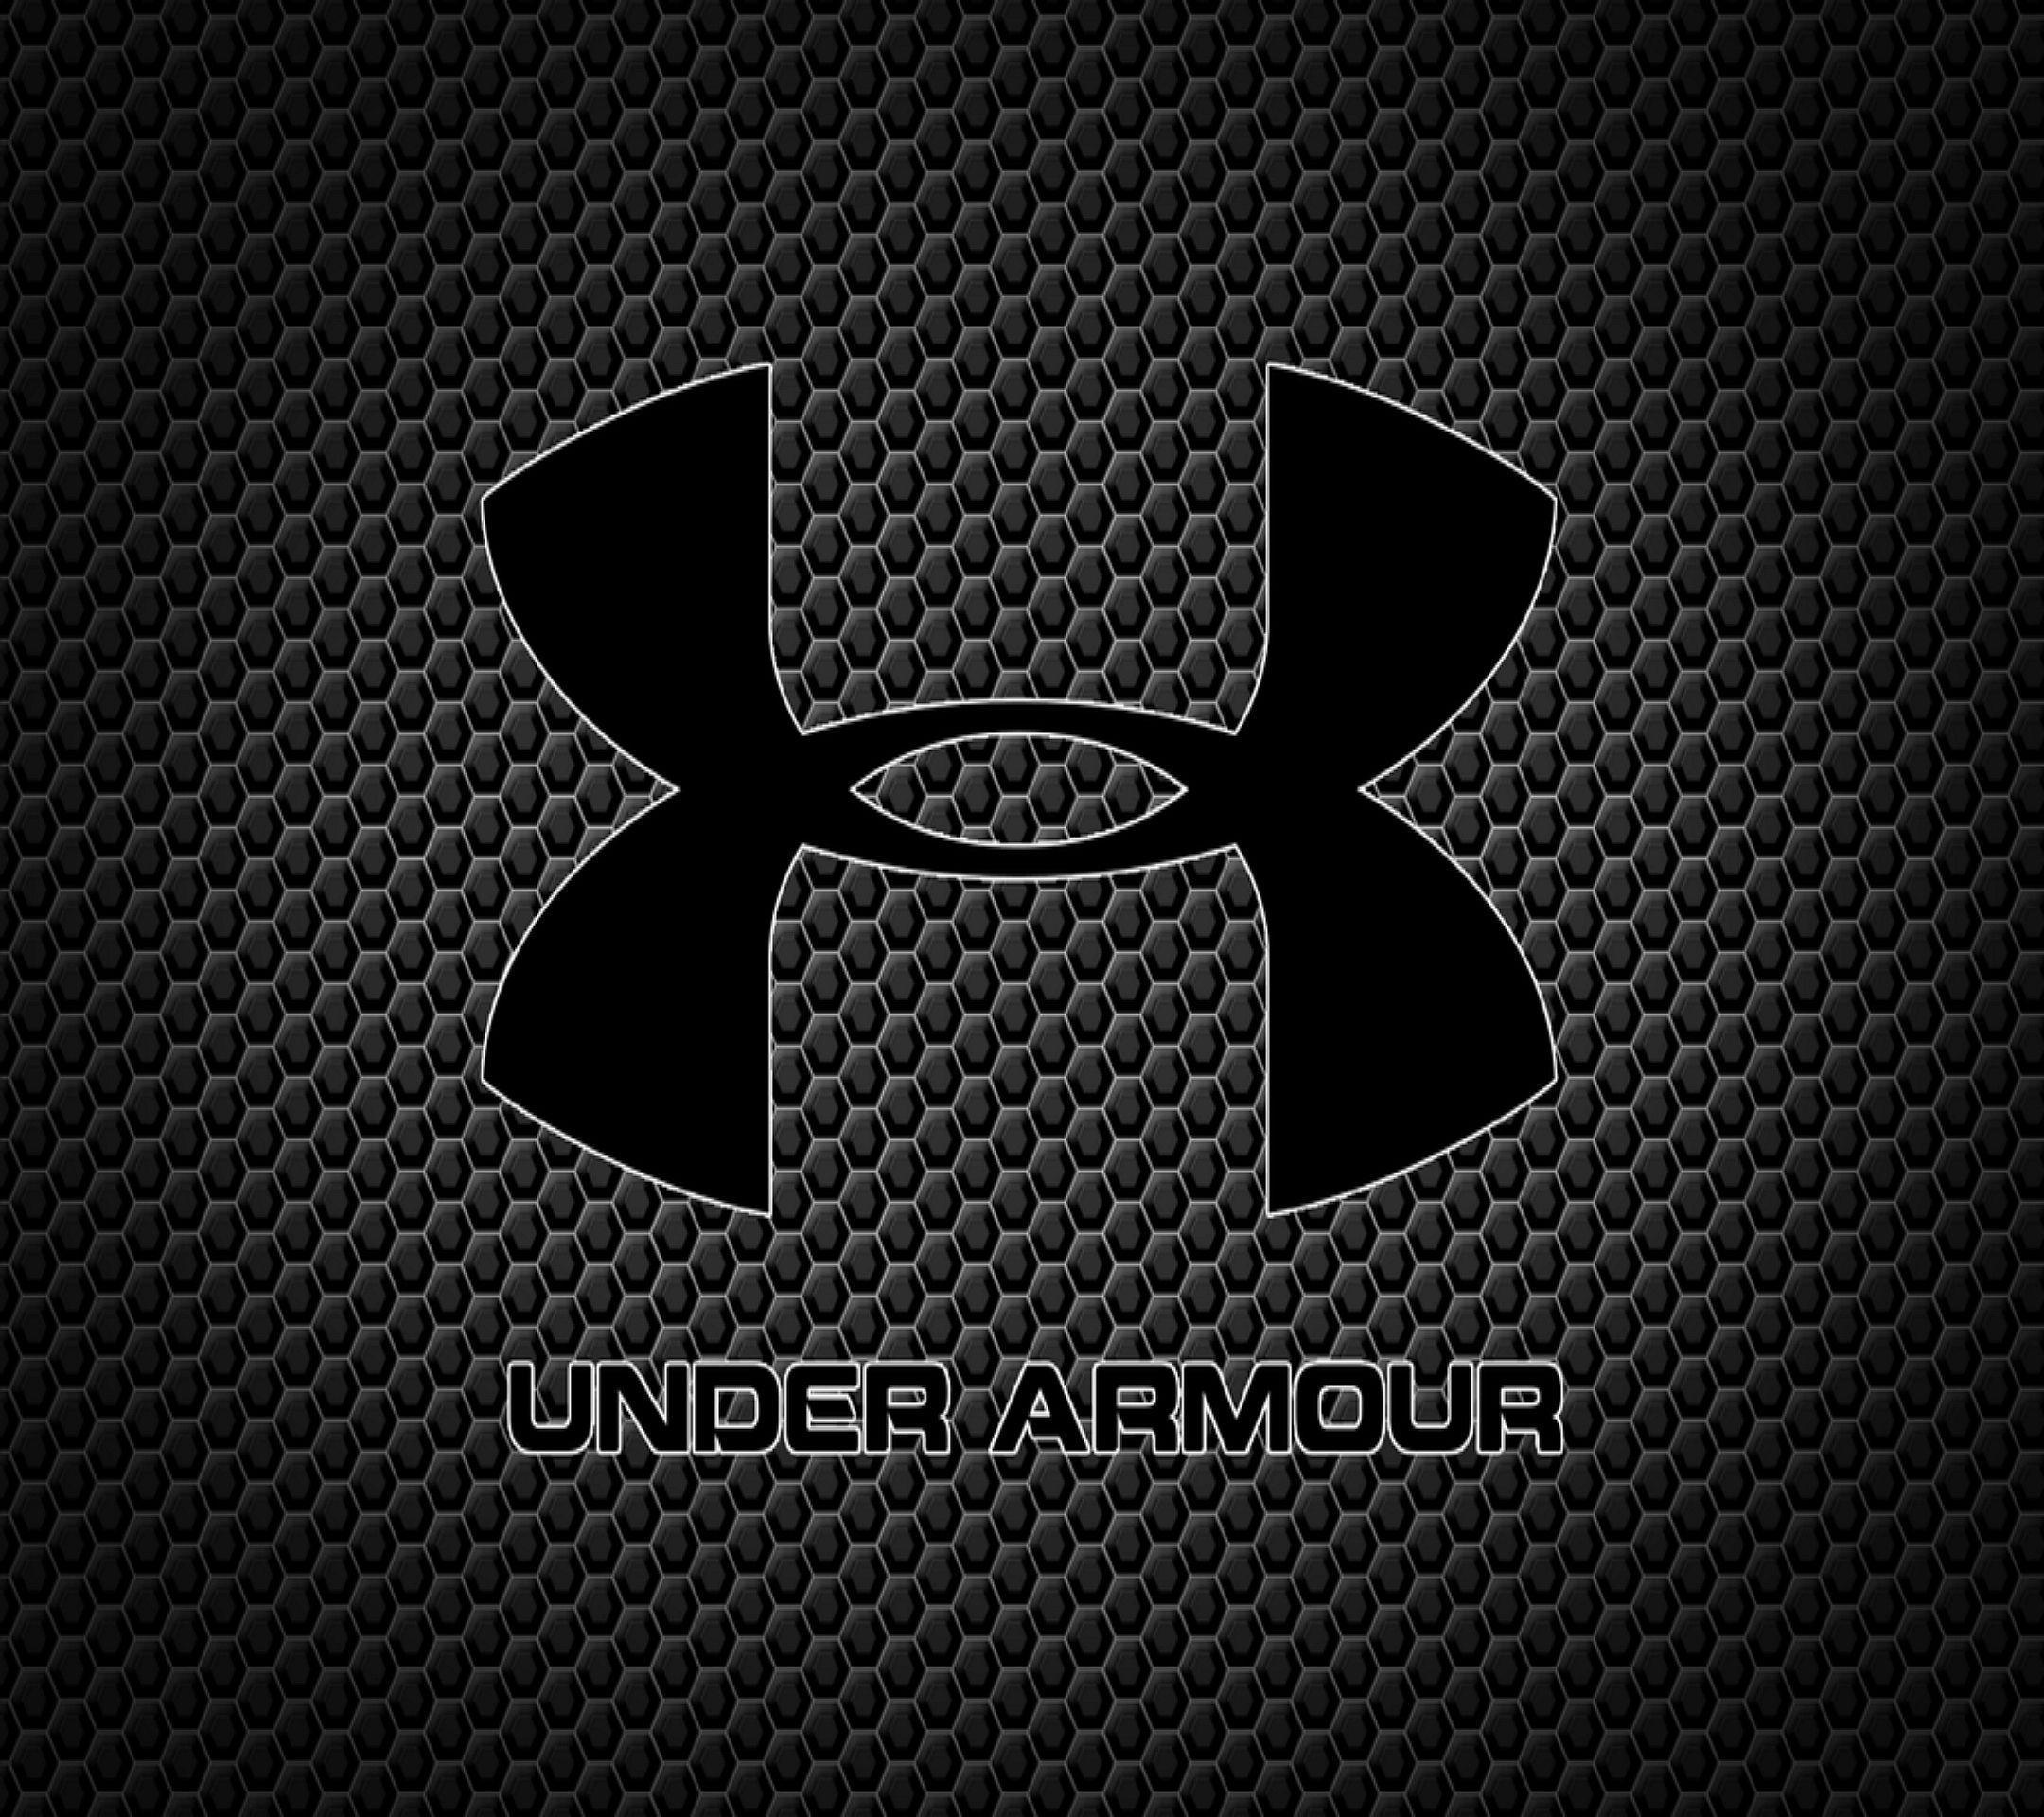 Under Armour Background Hd